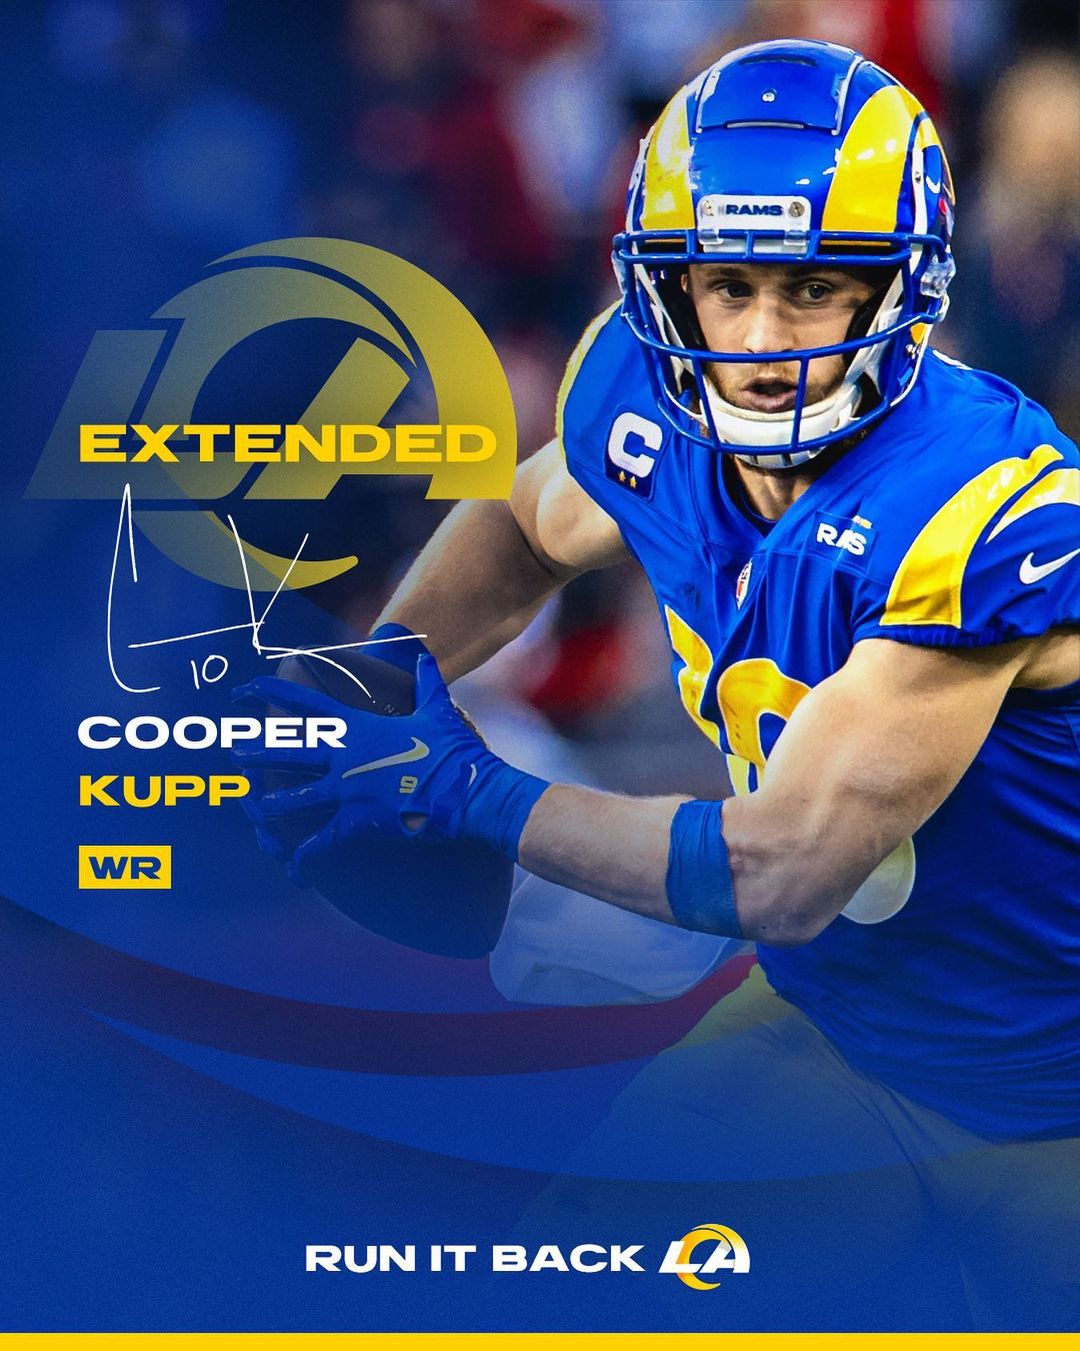 THIS IS 𝙏𝙃𝙀  COOPER KUPP EXTENSION POST!...